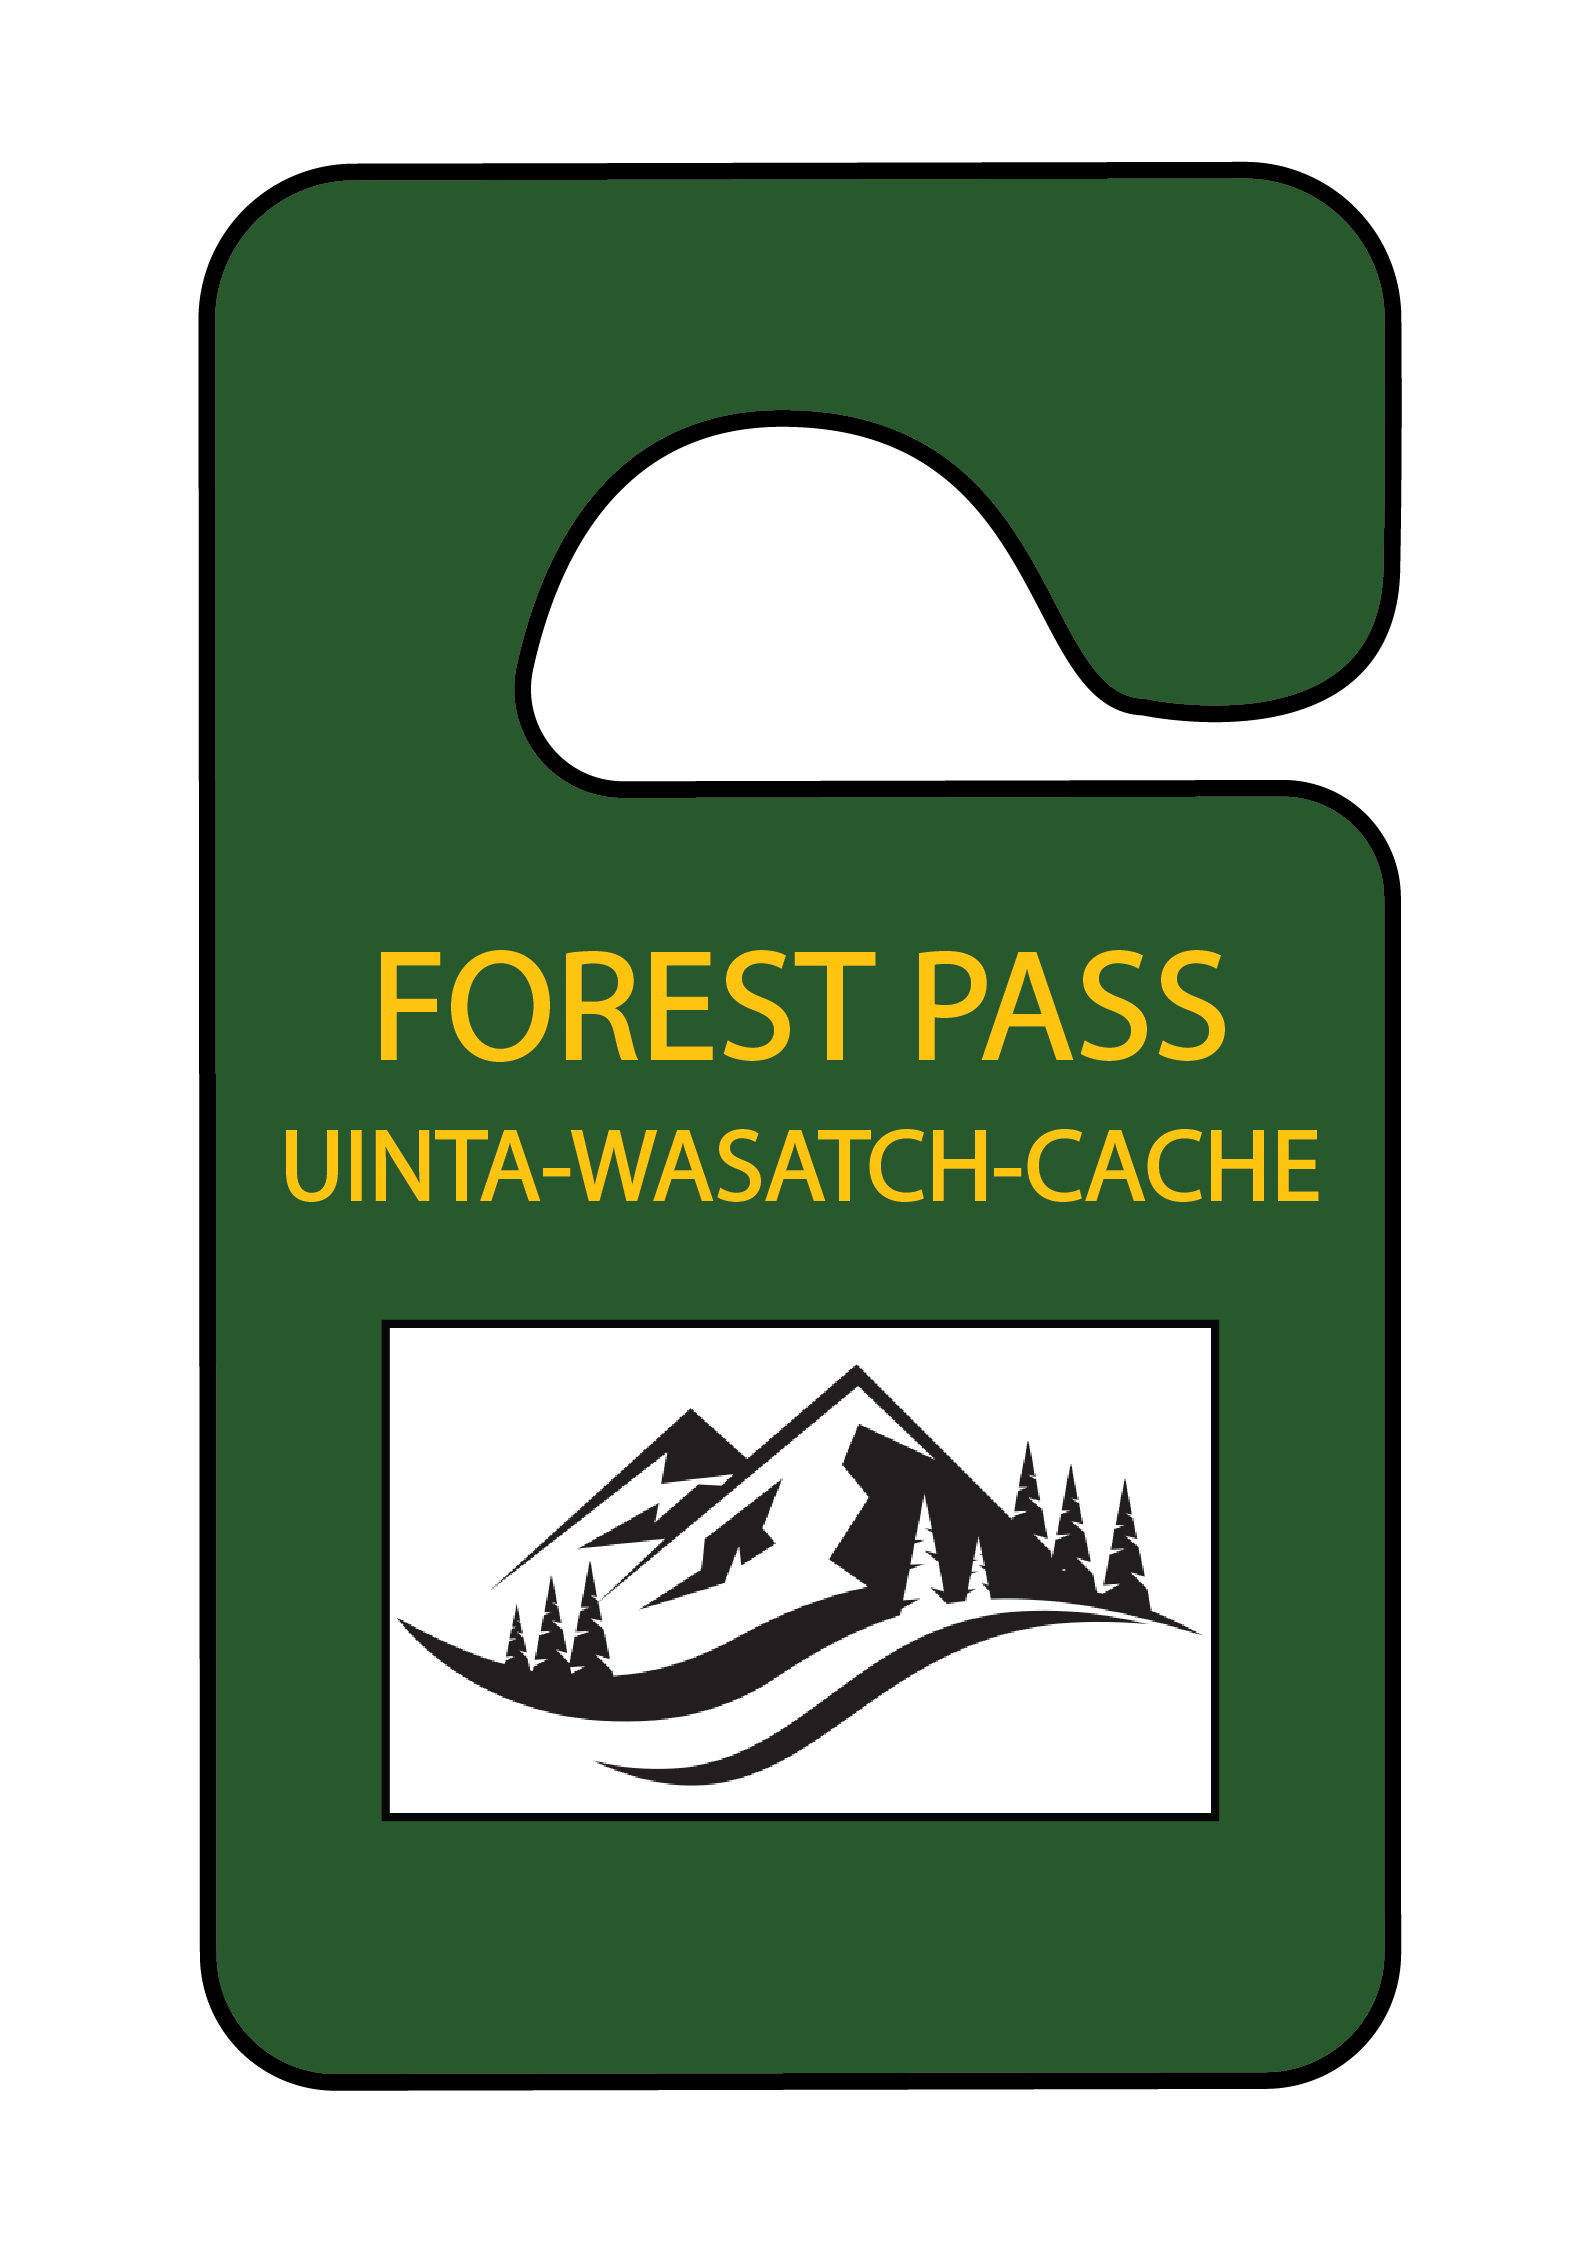 Uinta-Wasatch-Cache National Forest Pass